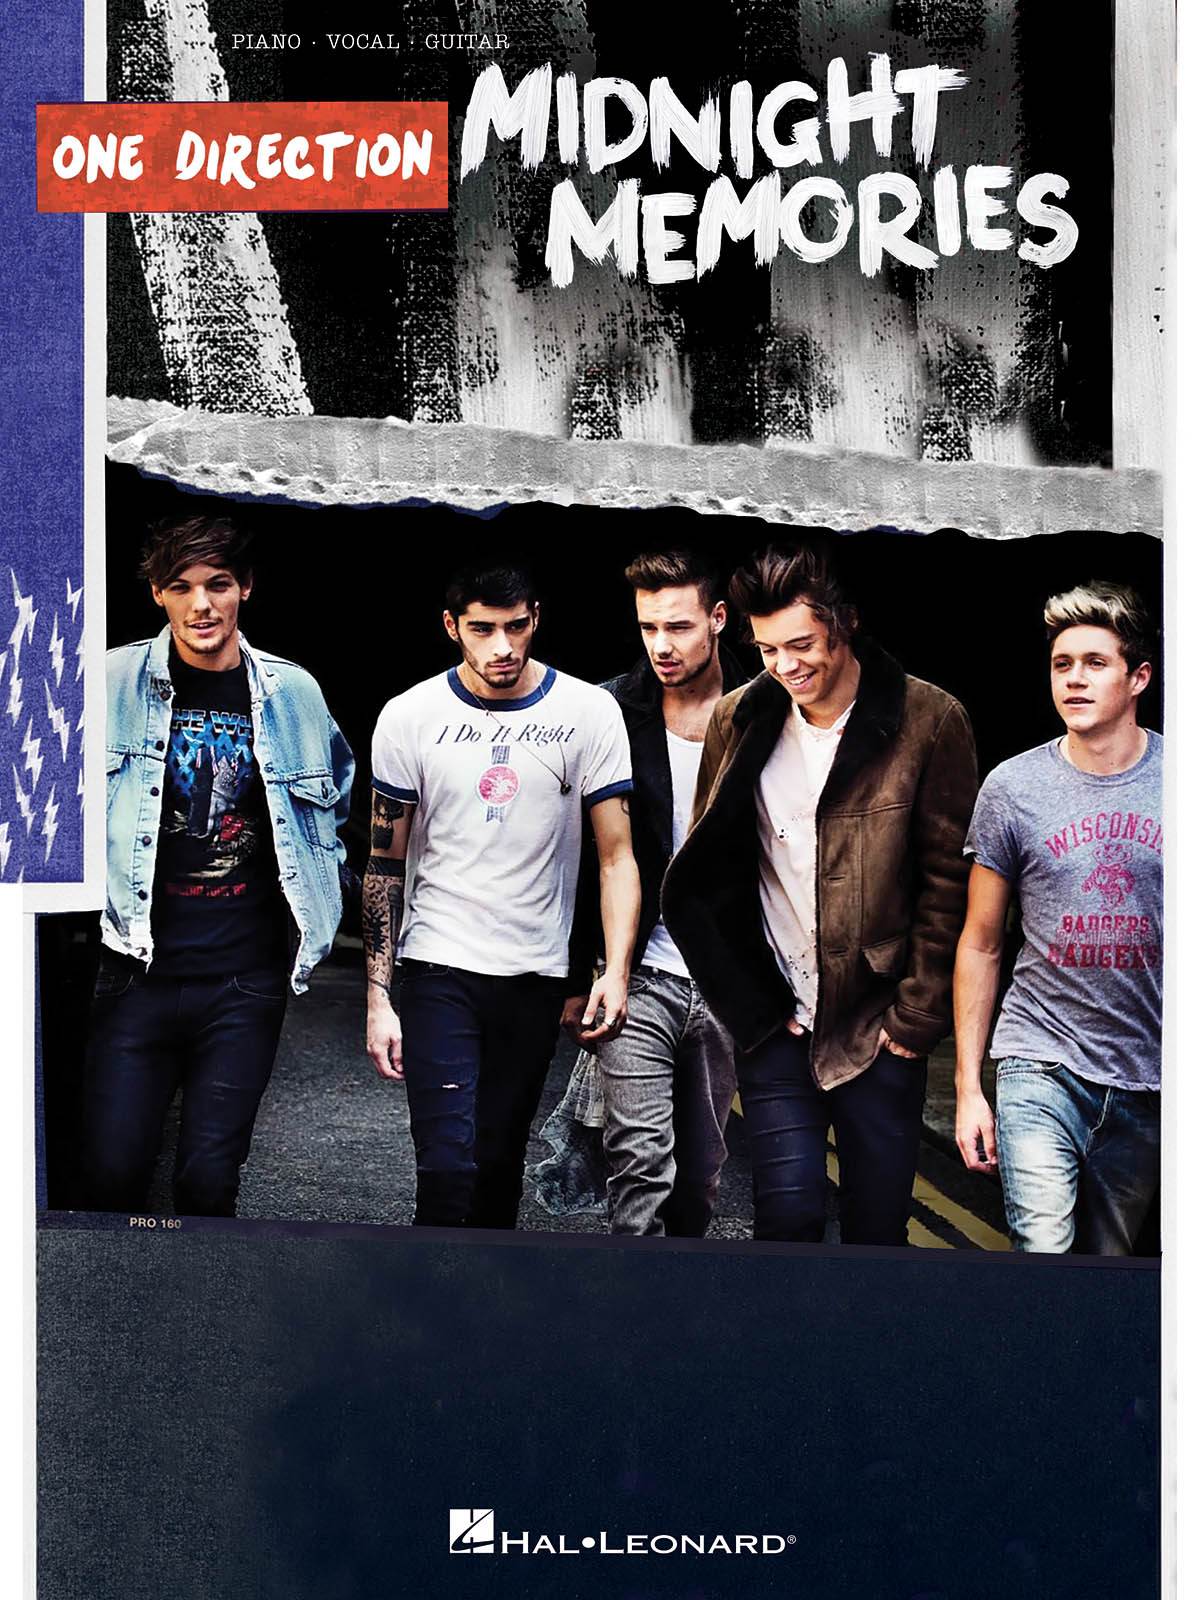 One Direction: One Direction - Midnight Memories: Piano  Vocal and Guitar: Album